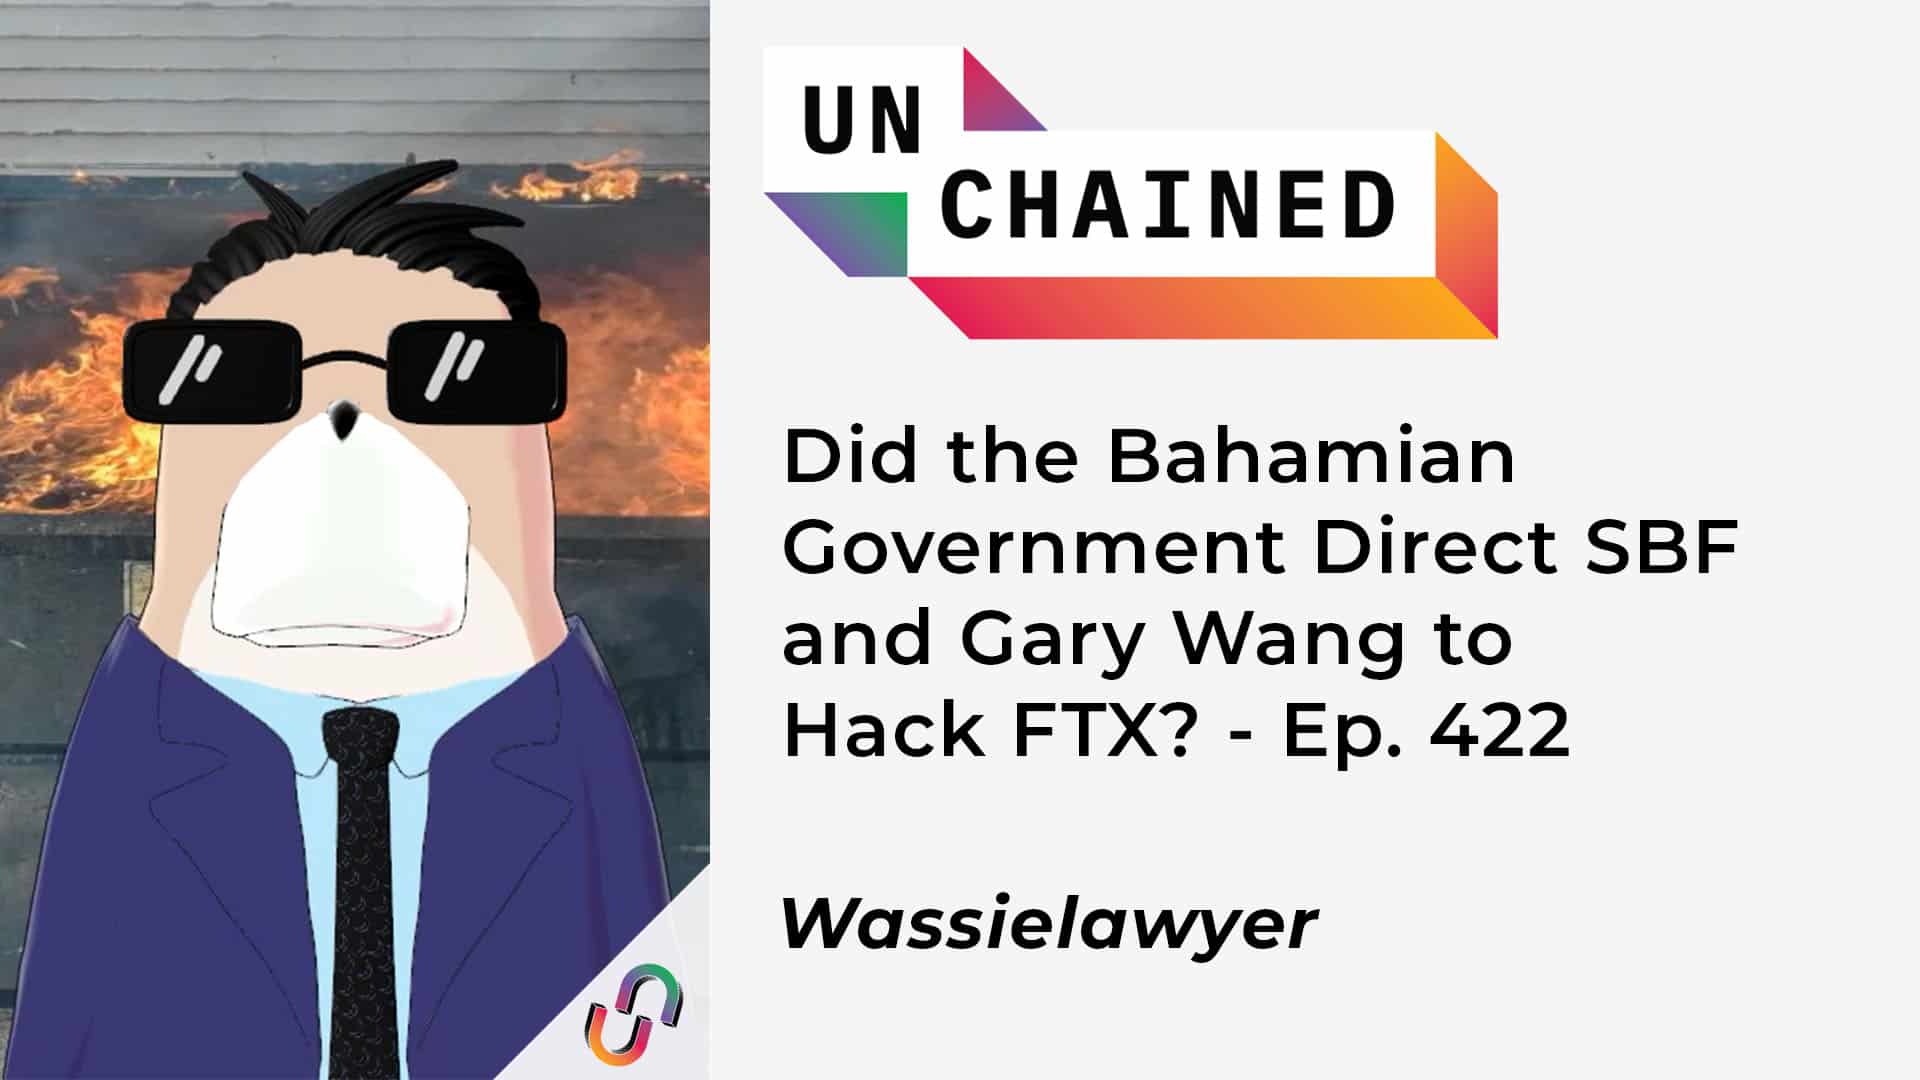 Did the Bahamian Government Direct SBF and Gary Wang to Hack FTX? - Ep. 422